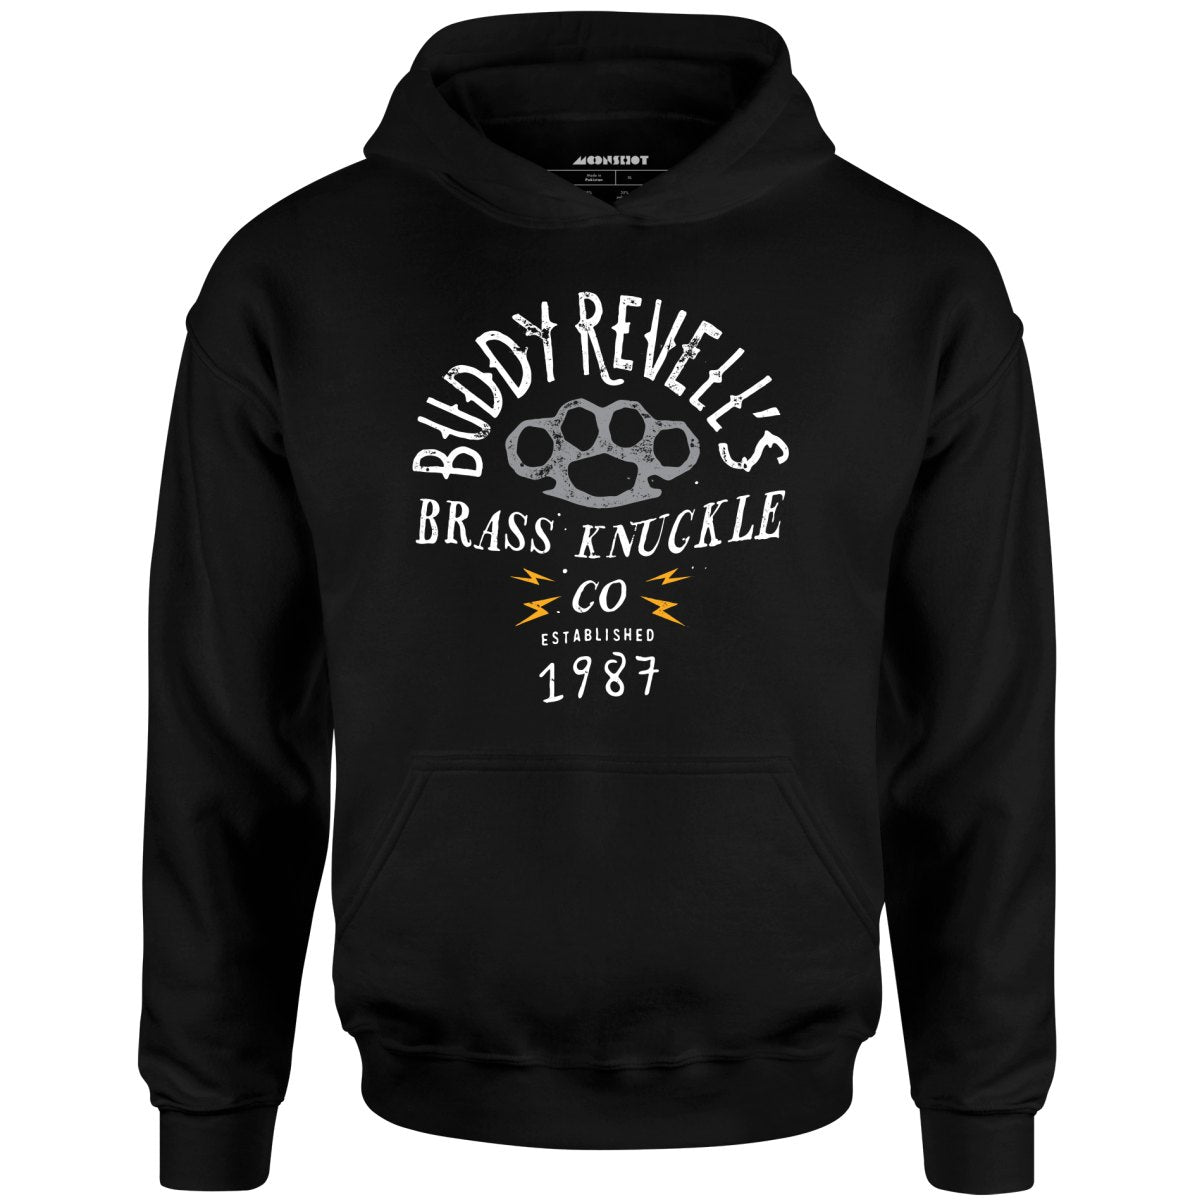 Buddy Revell's Brass Knuckle Co. - Unisex Hoodie